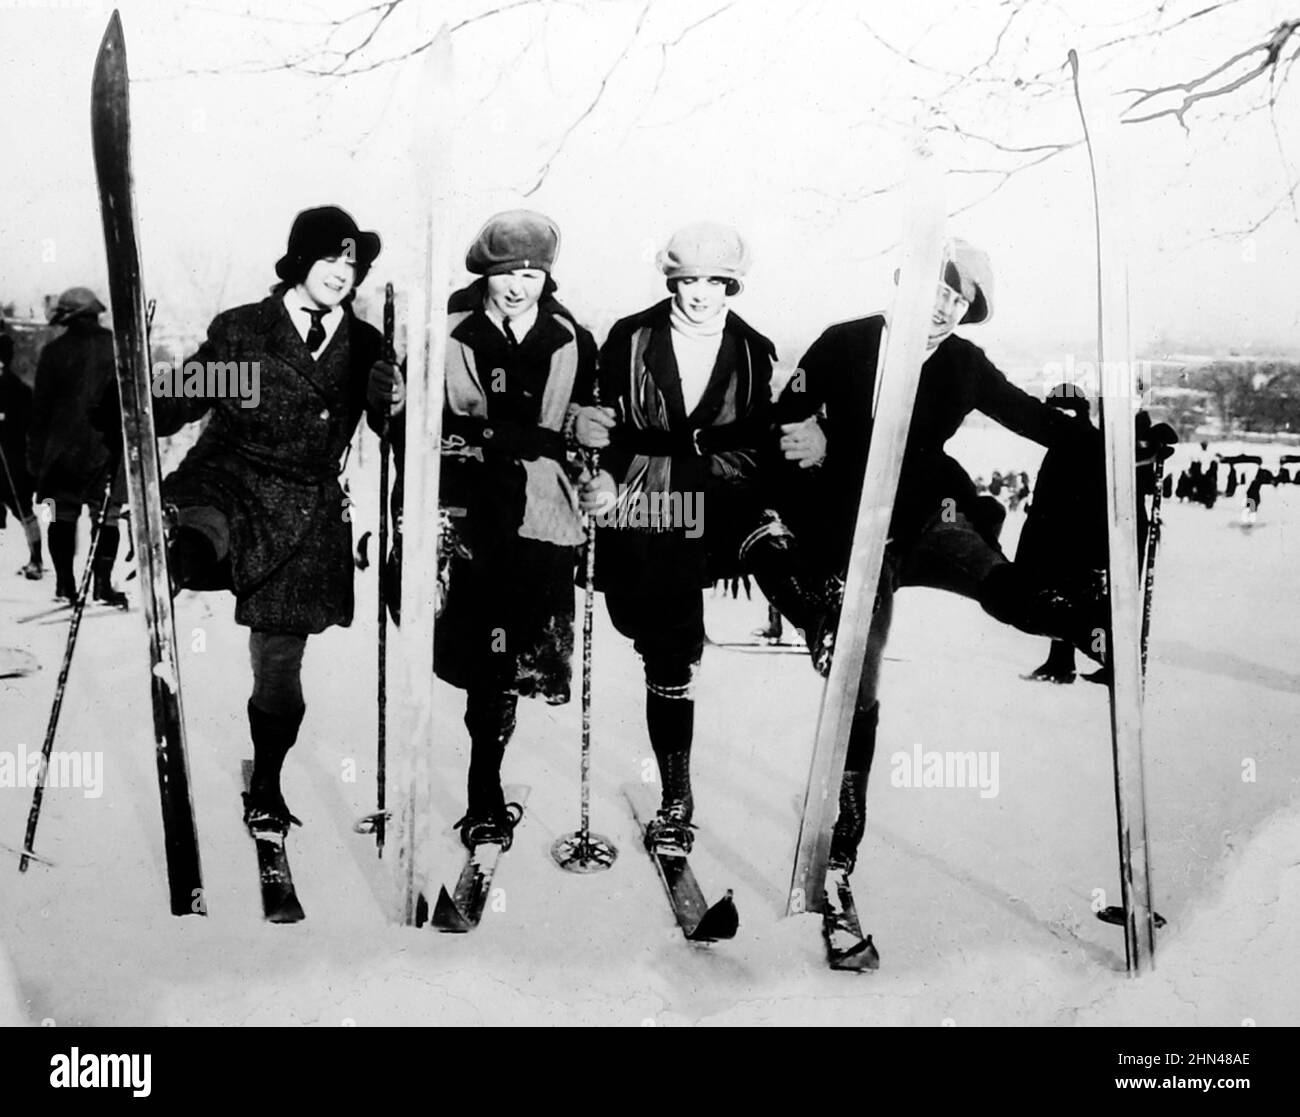 Girls skiing, Montreal, Canada, early 1900s Stock Photo